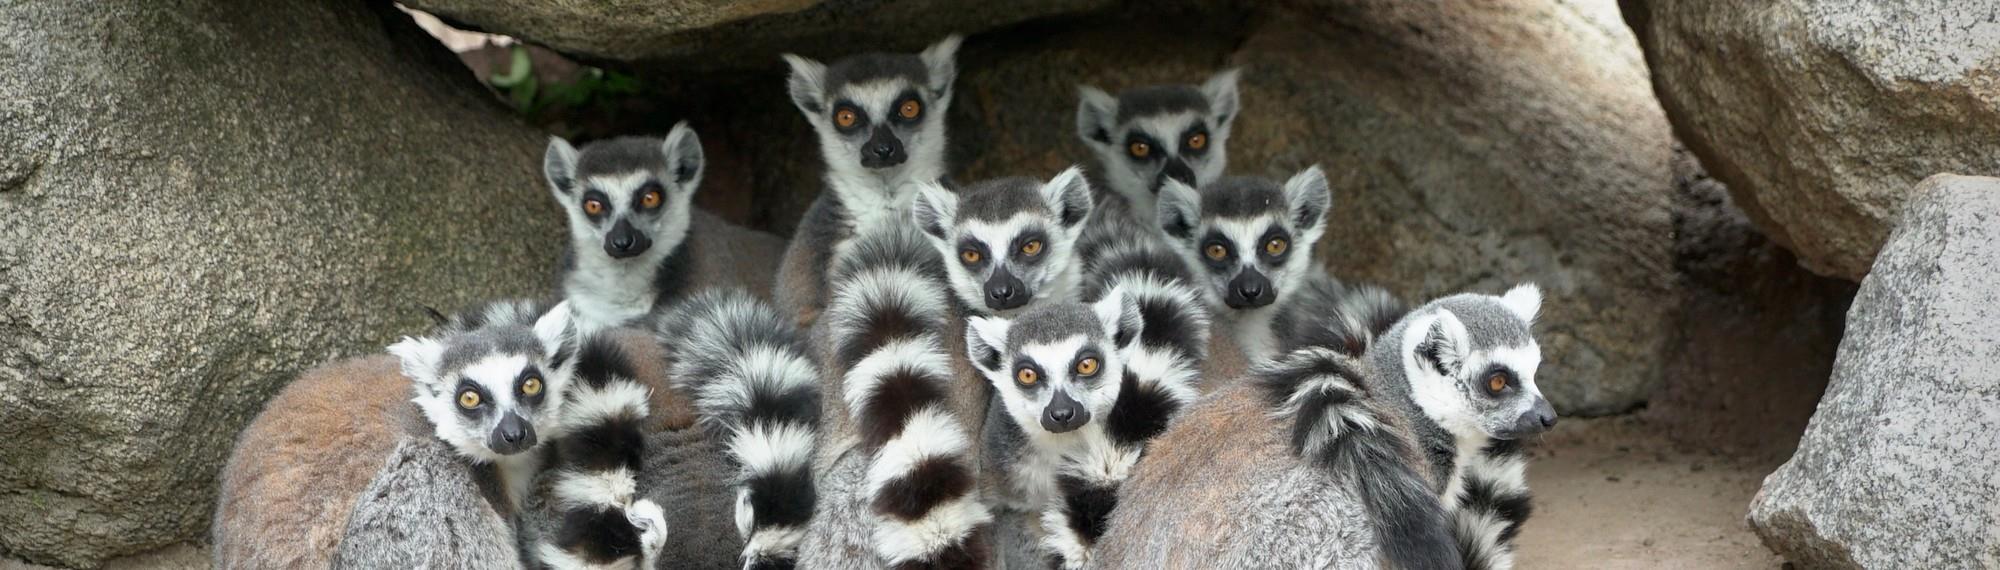 Eight Lemurs clustered together in front of some some rocks and all looking to the camera.